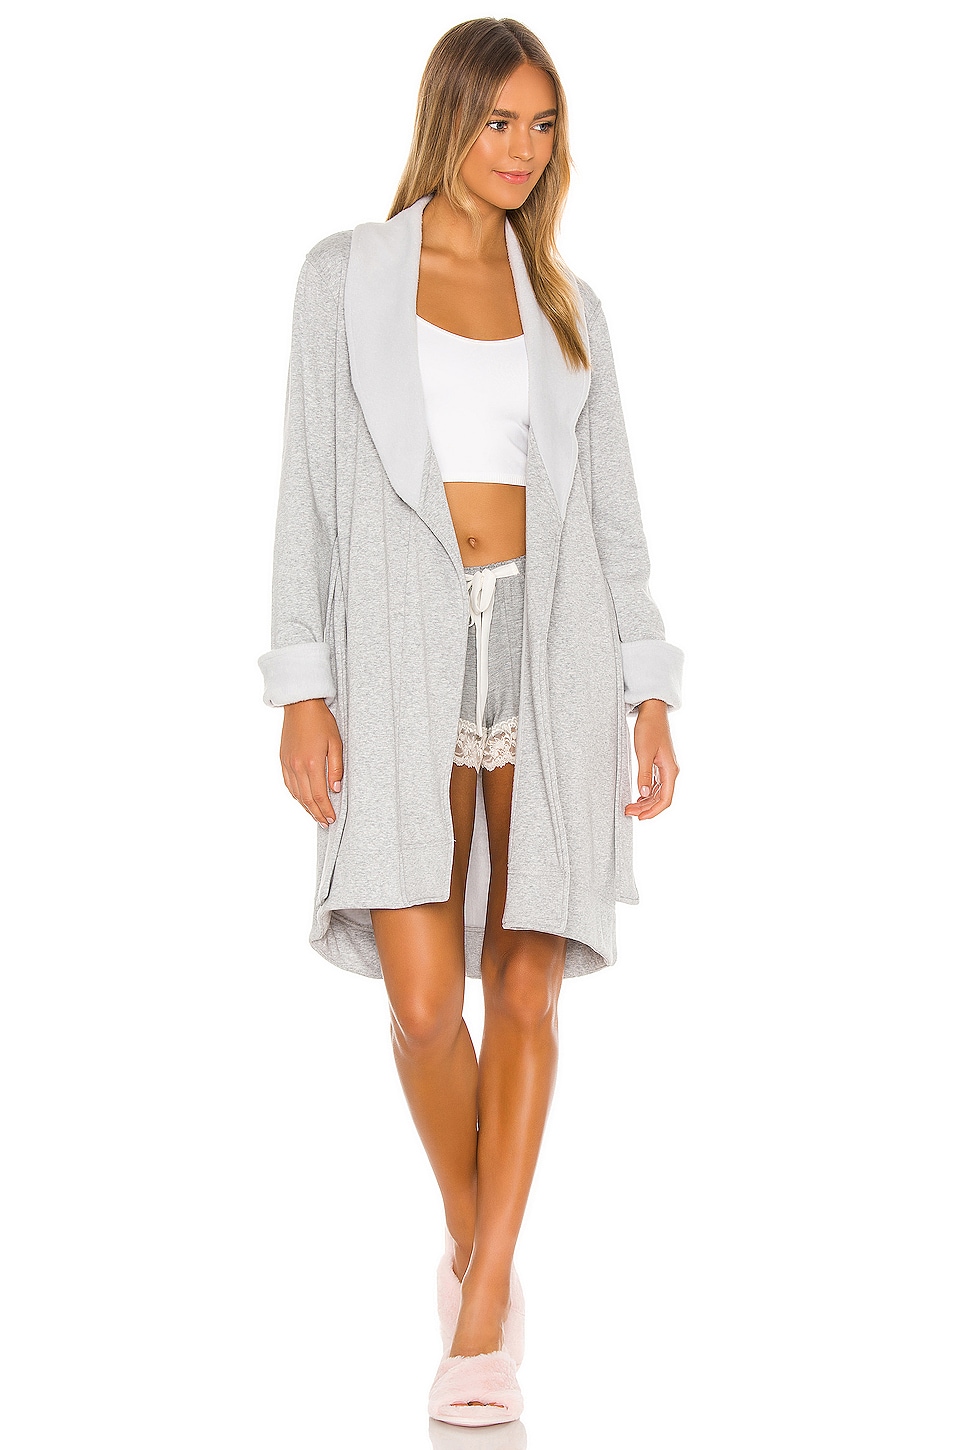 UGG Blanche II Robe in Seal Heather 